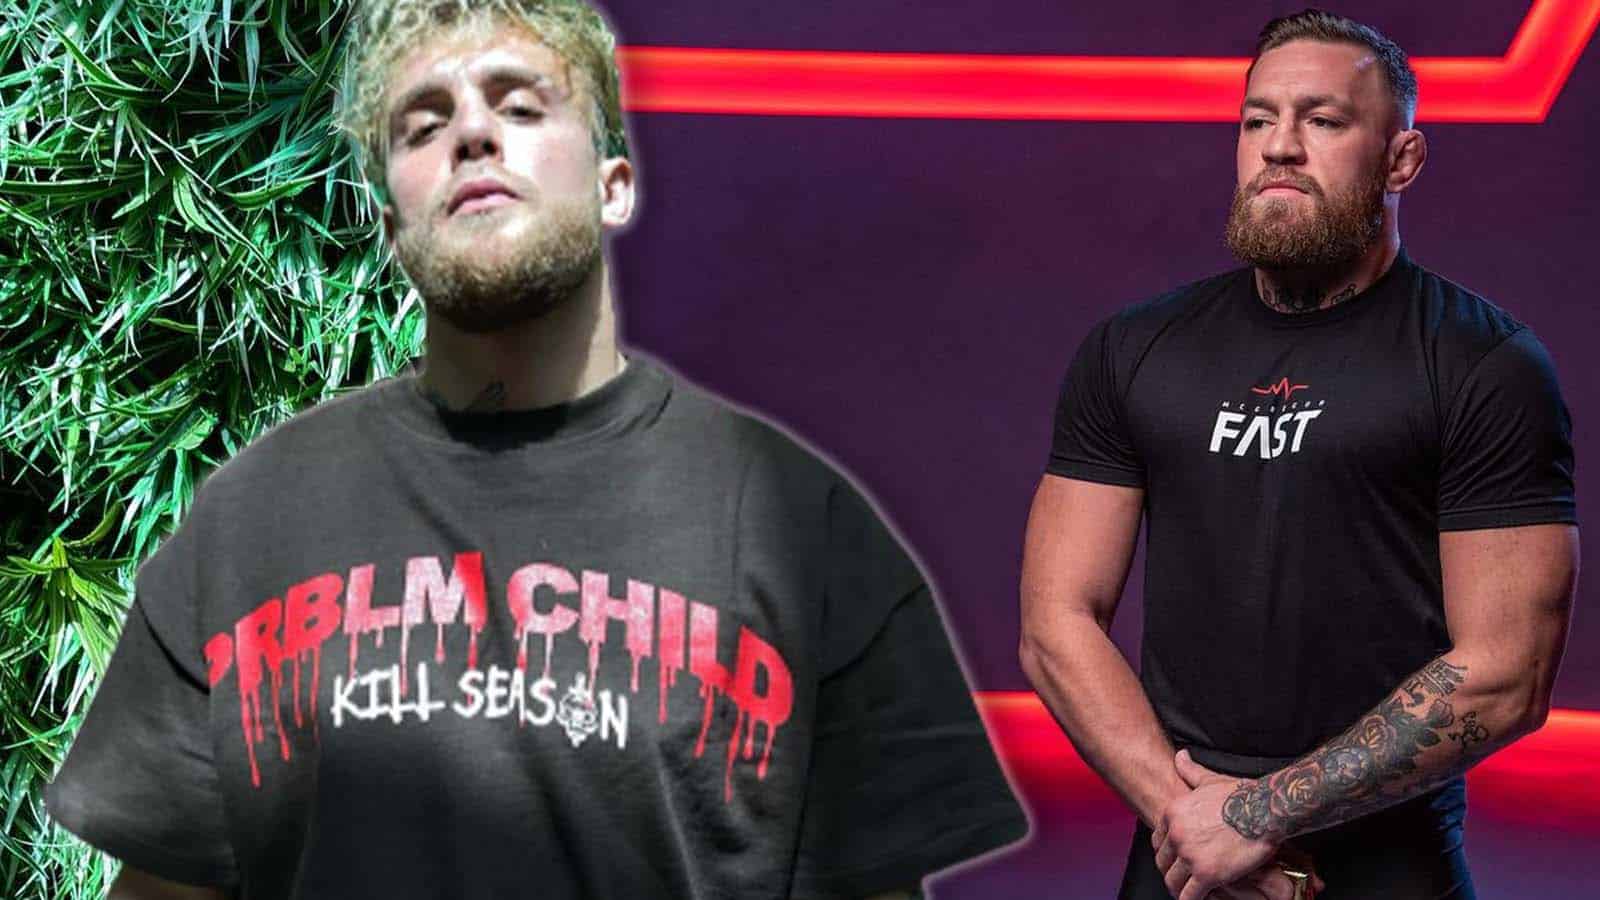 UFC coach claims Jake Paul has "many advantages" over Conor McGregor in boxing bout